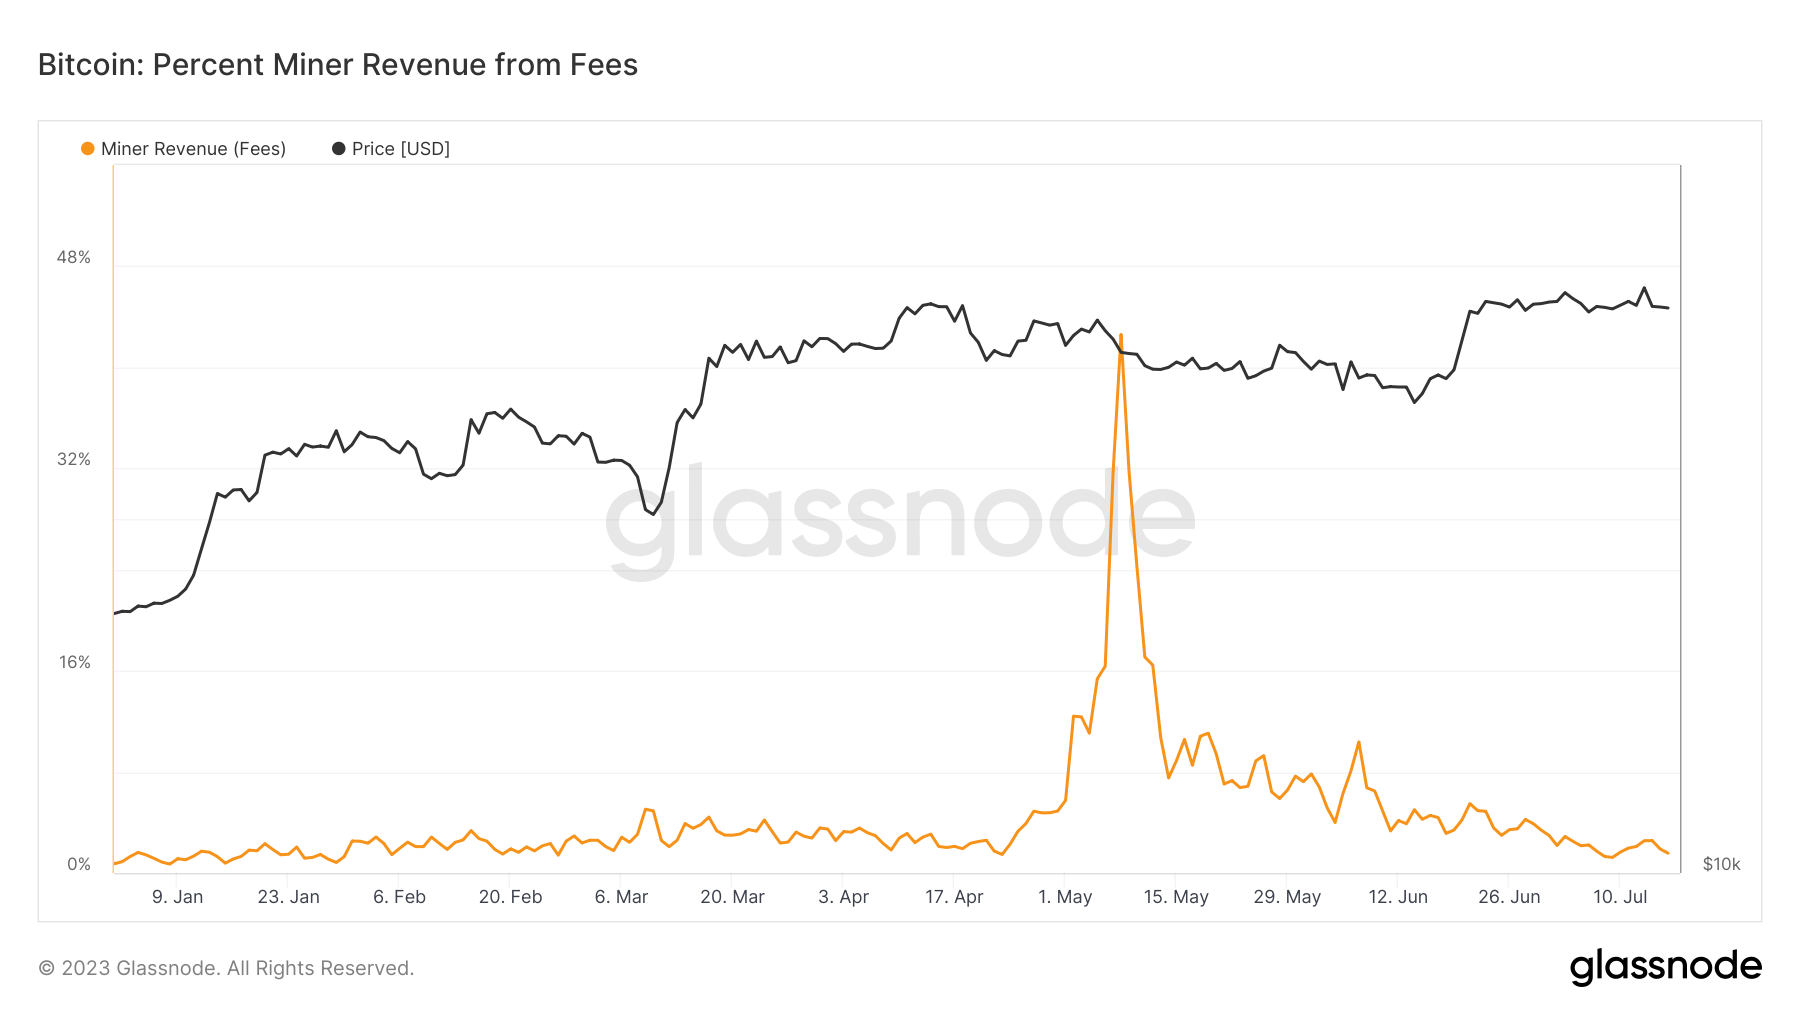 bitcoin miner percent revenue from fees ytd